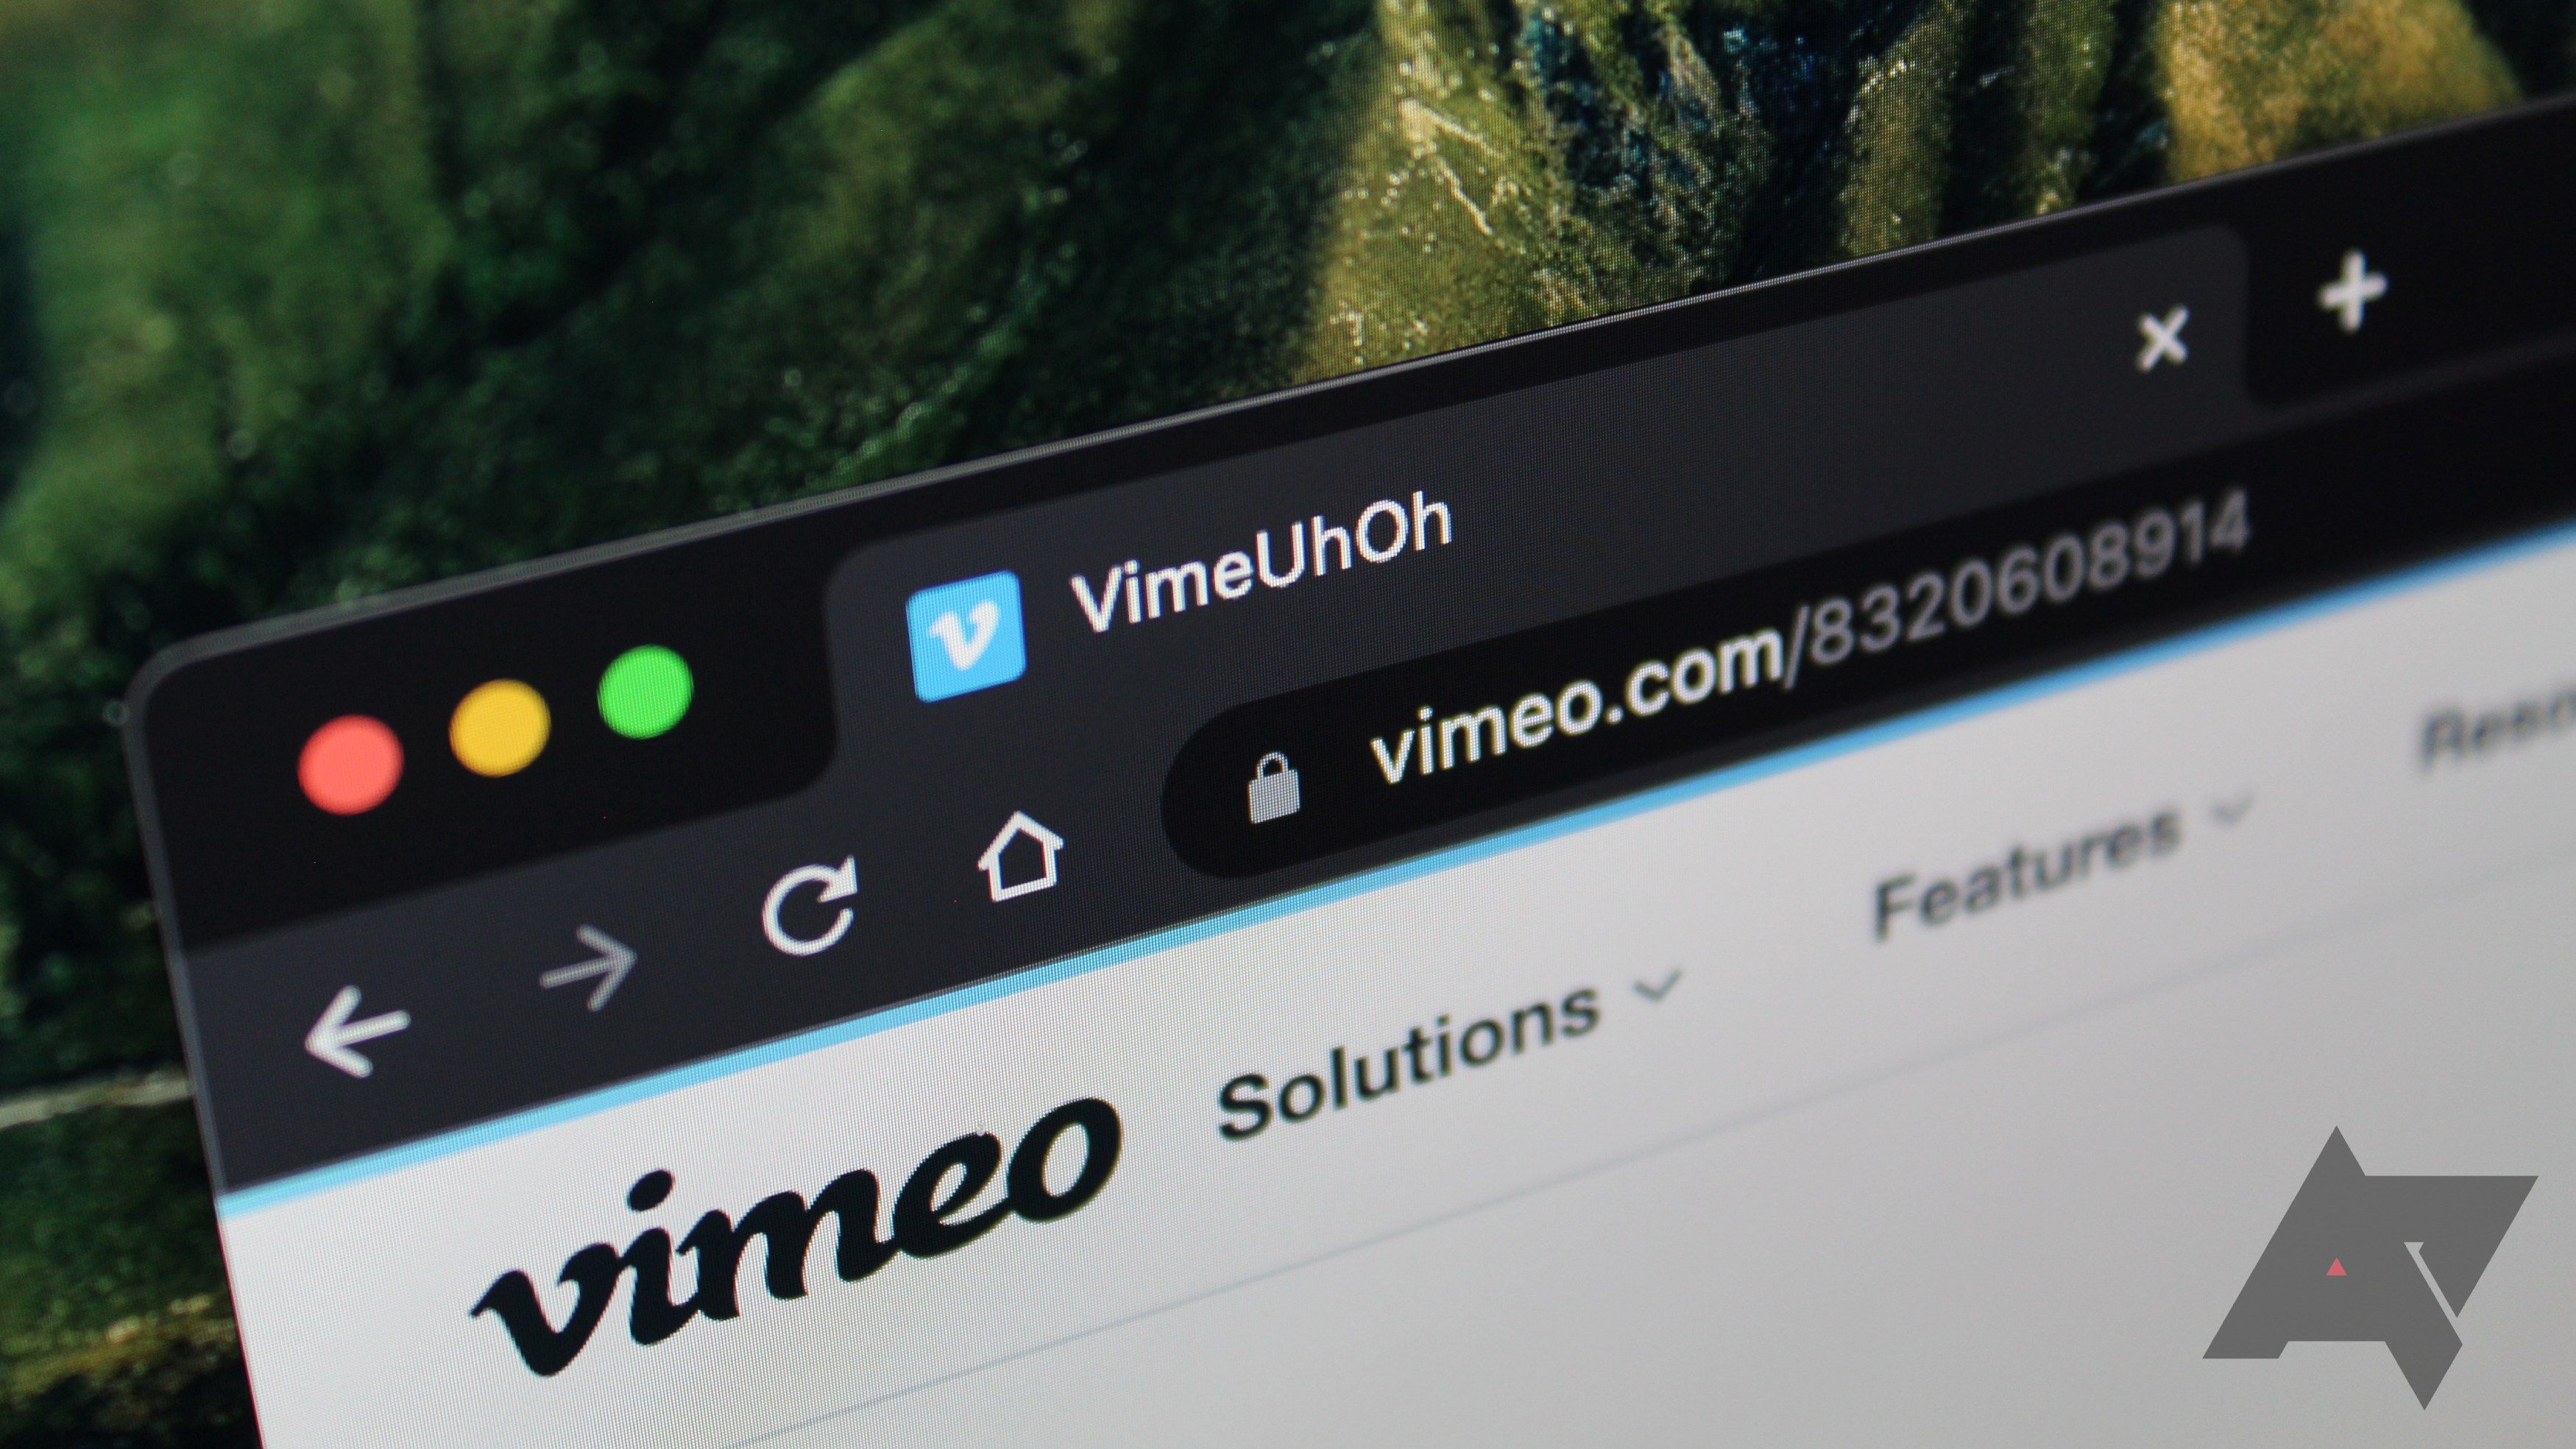 Vimeo is retiring its Android TV app in favor of casting